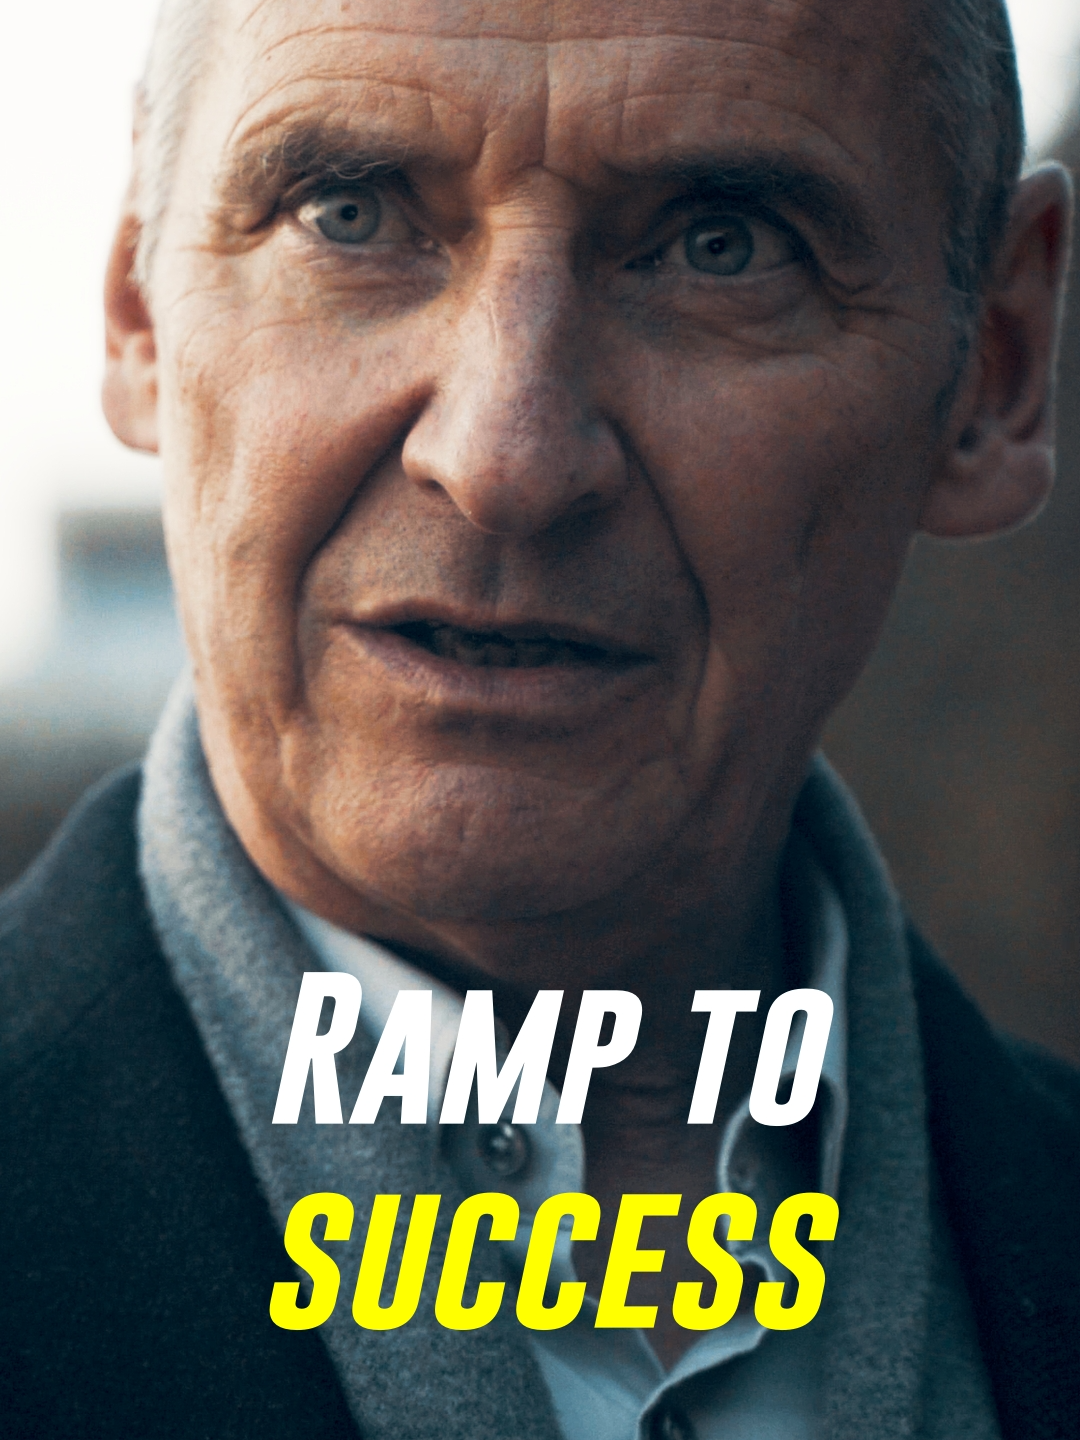 Go to the Top On this Ramp - Powerful Advice #russianmafiaboss #grimhustle #success #lifeadvice